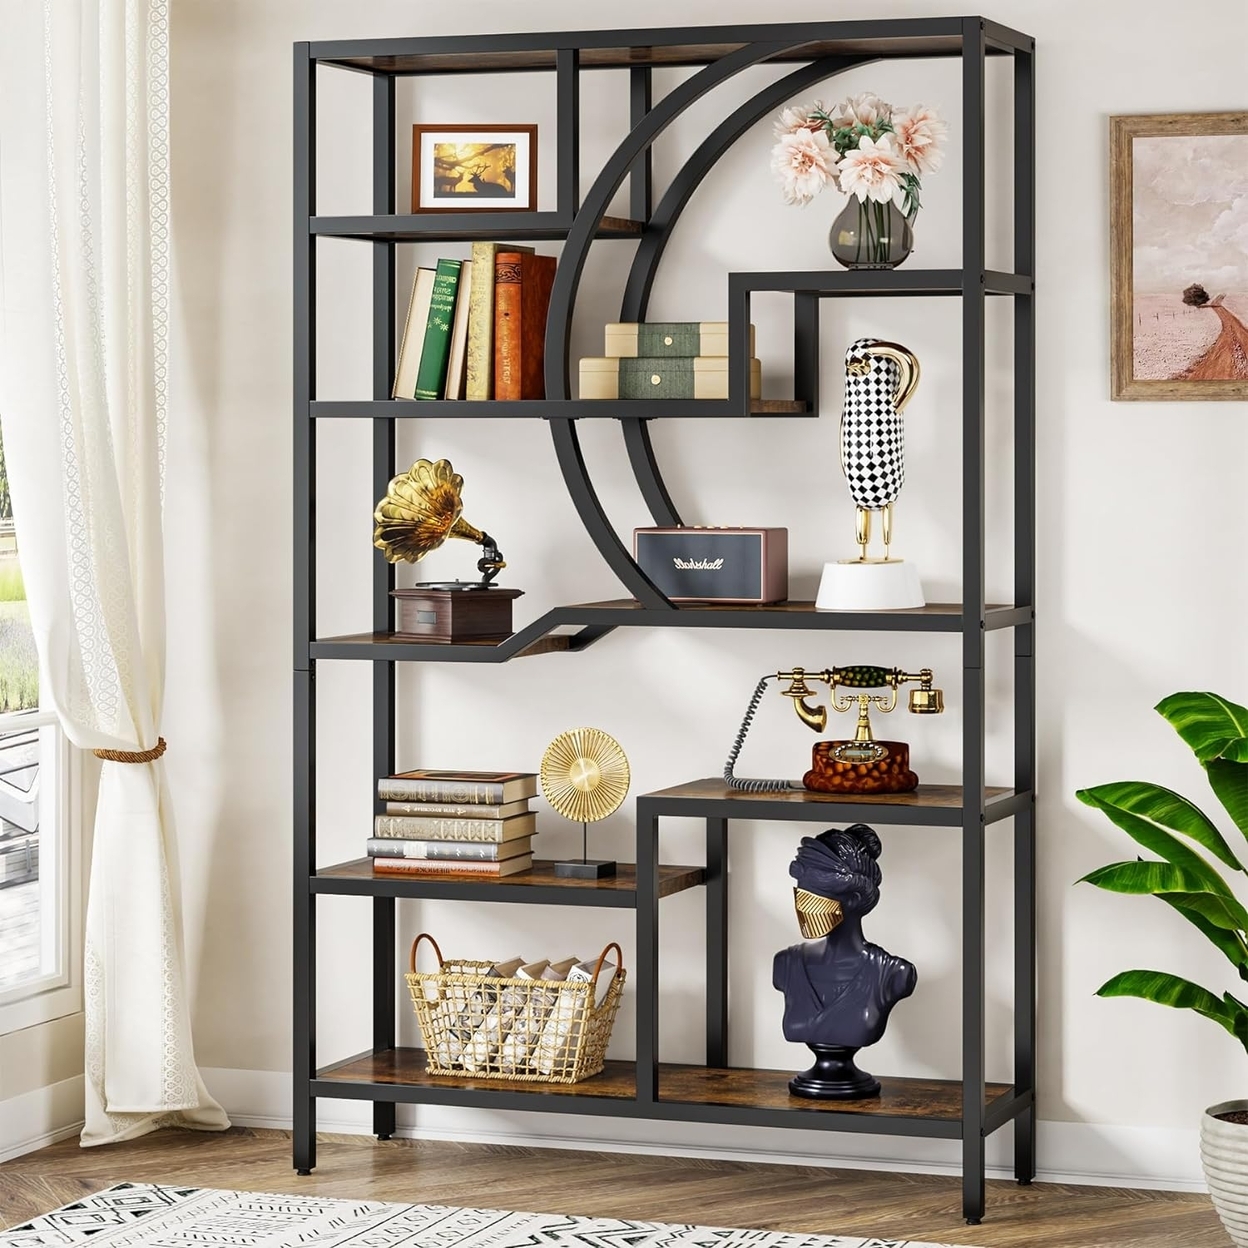 Tribesigns 69 Tall Bookshelf, Industrial 6-Tier Etagere Bookcase, Freestanding Open Storage Display Shelving Unit With 9 Open Shelves - 1pc